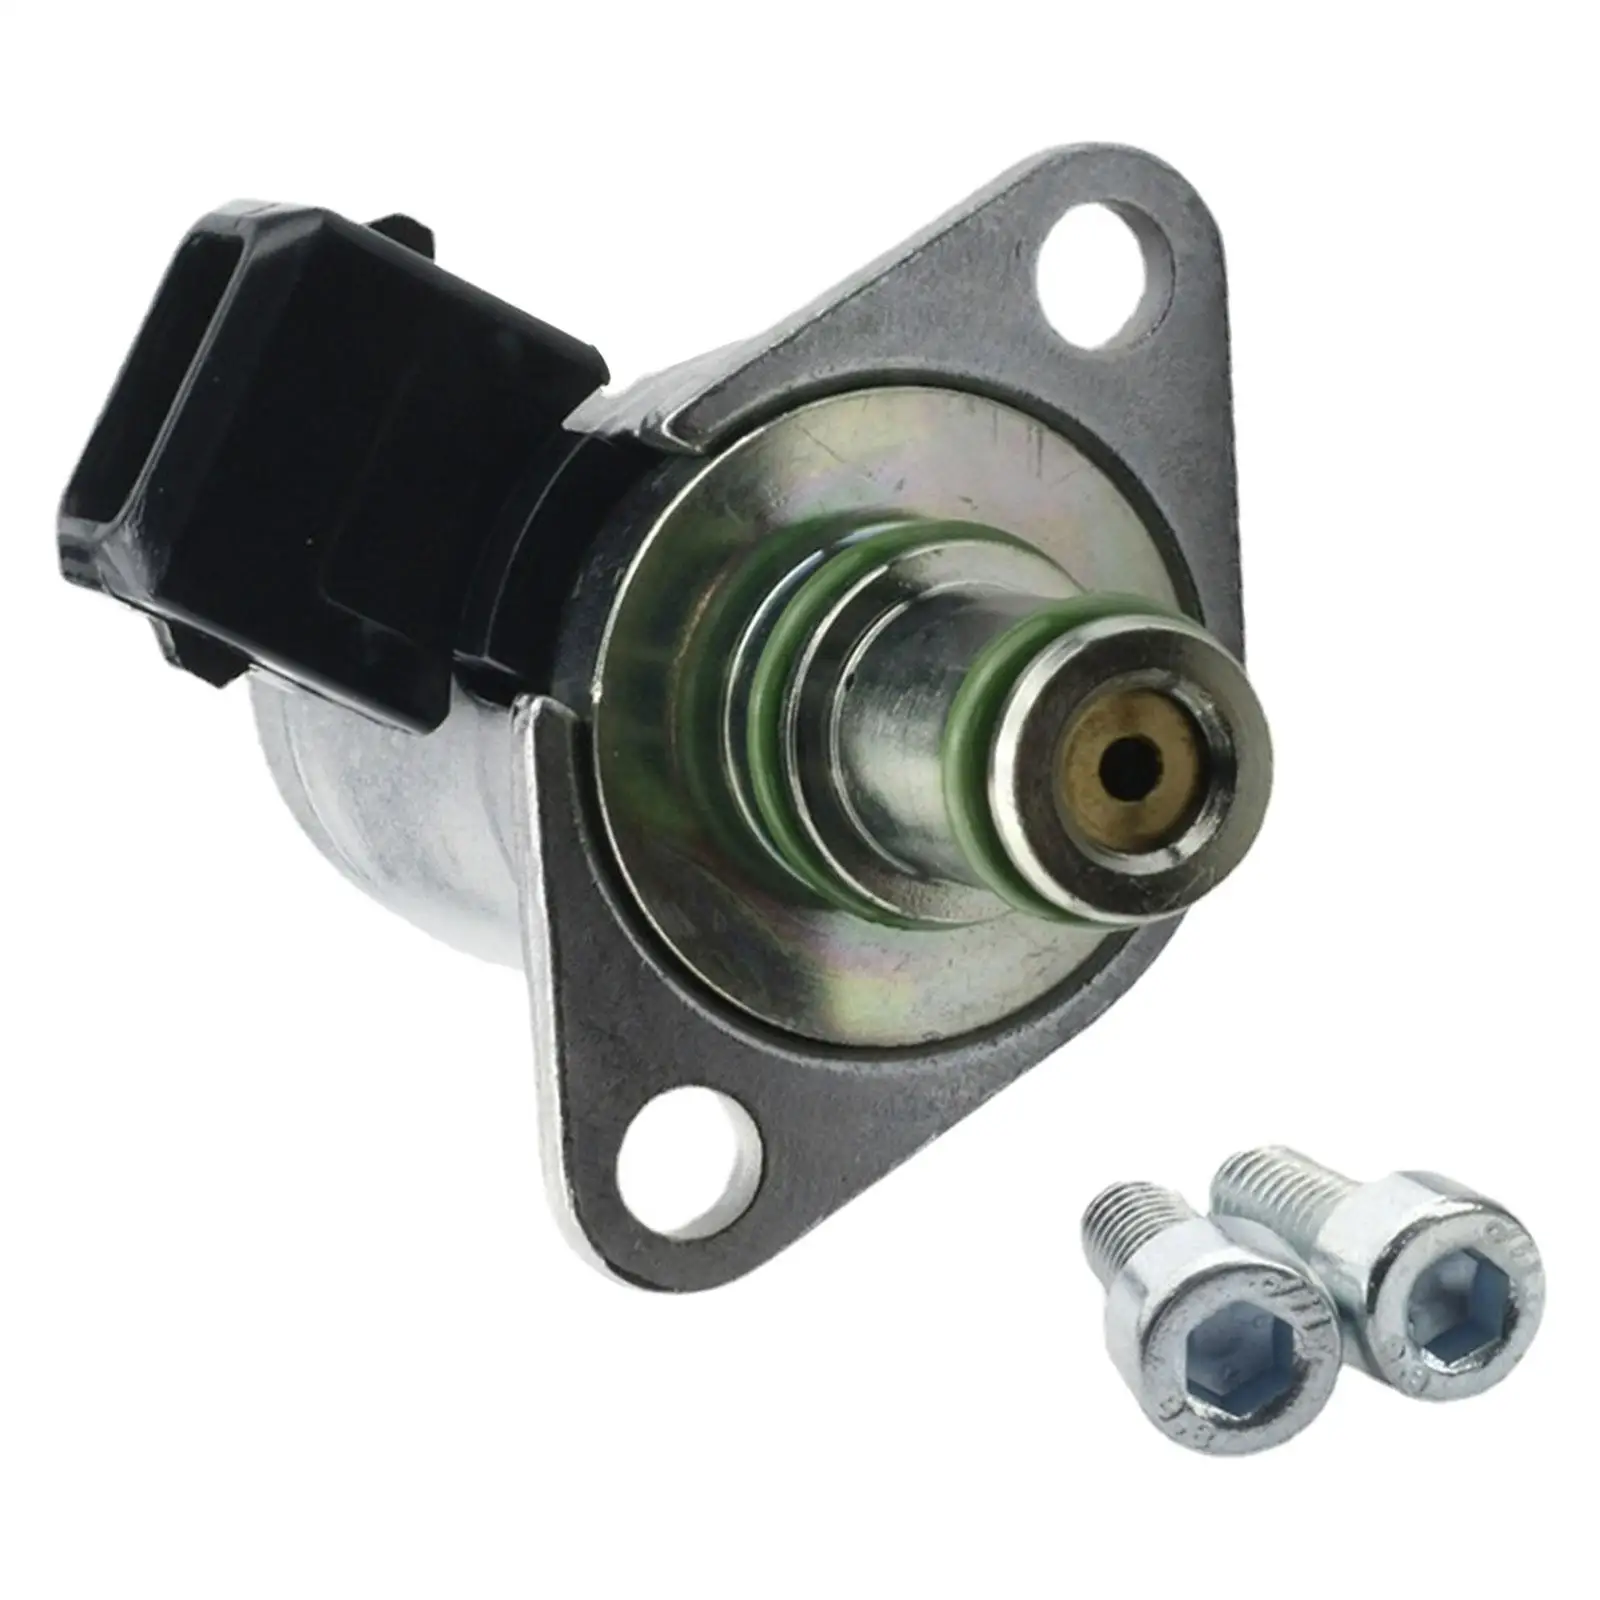 Power Speed Related Steering Proportioning Valve Replaces Durable High